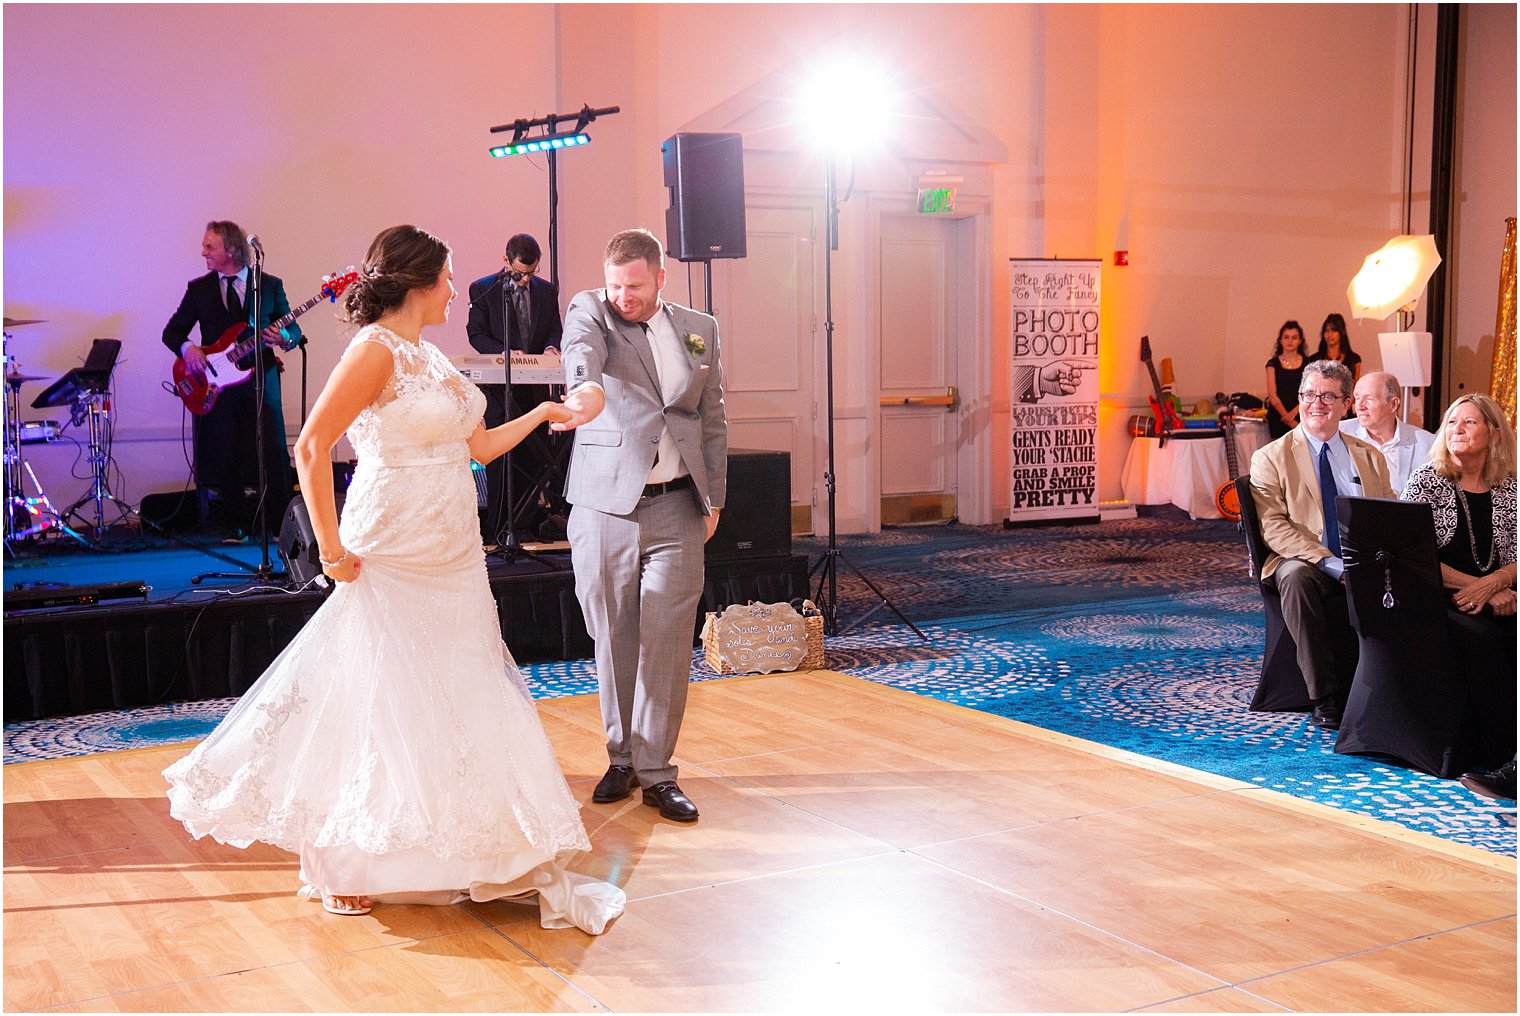 groom dancing with bride during reception at Gatsby inspired wedding